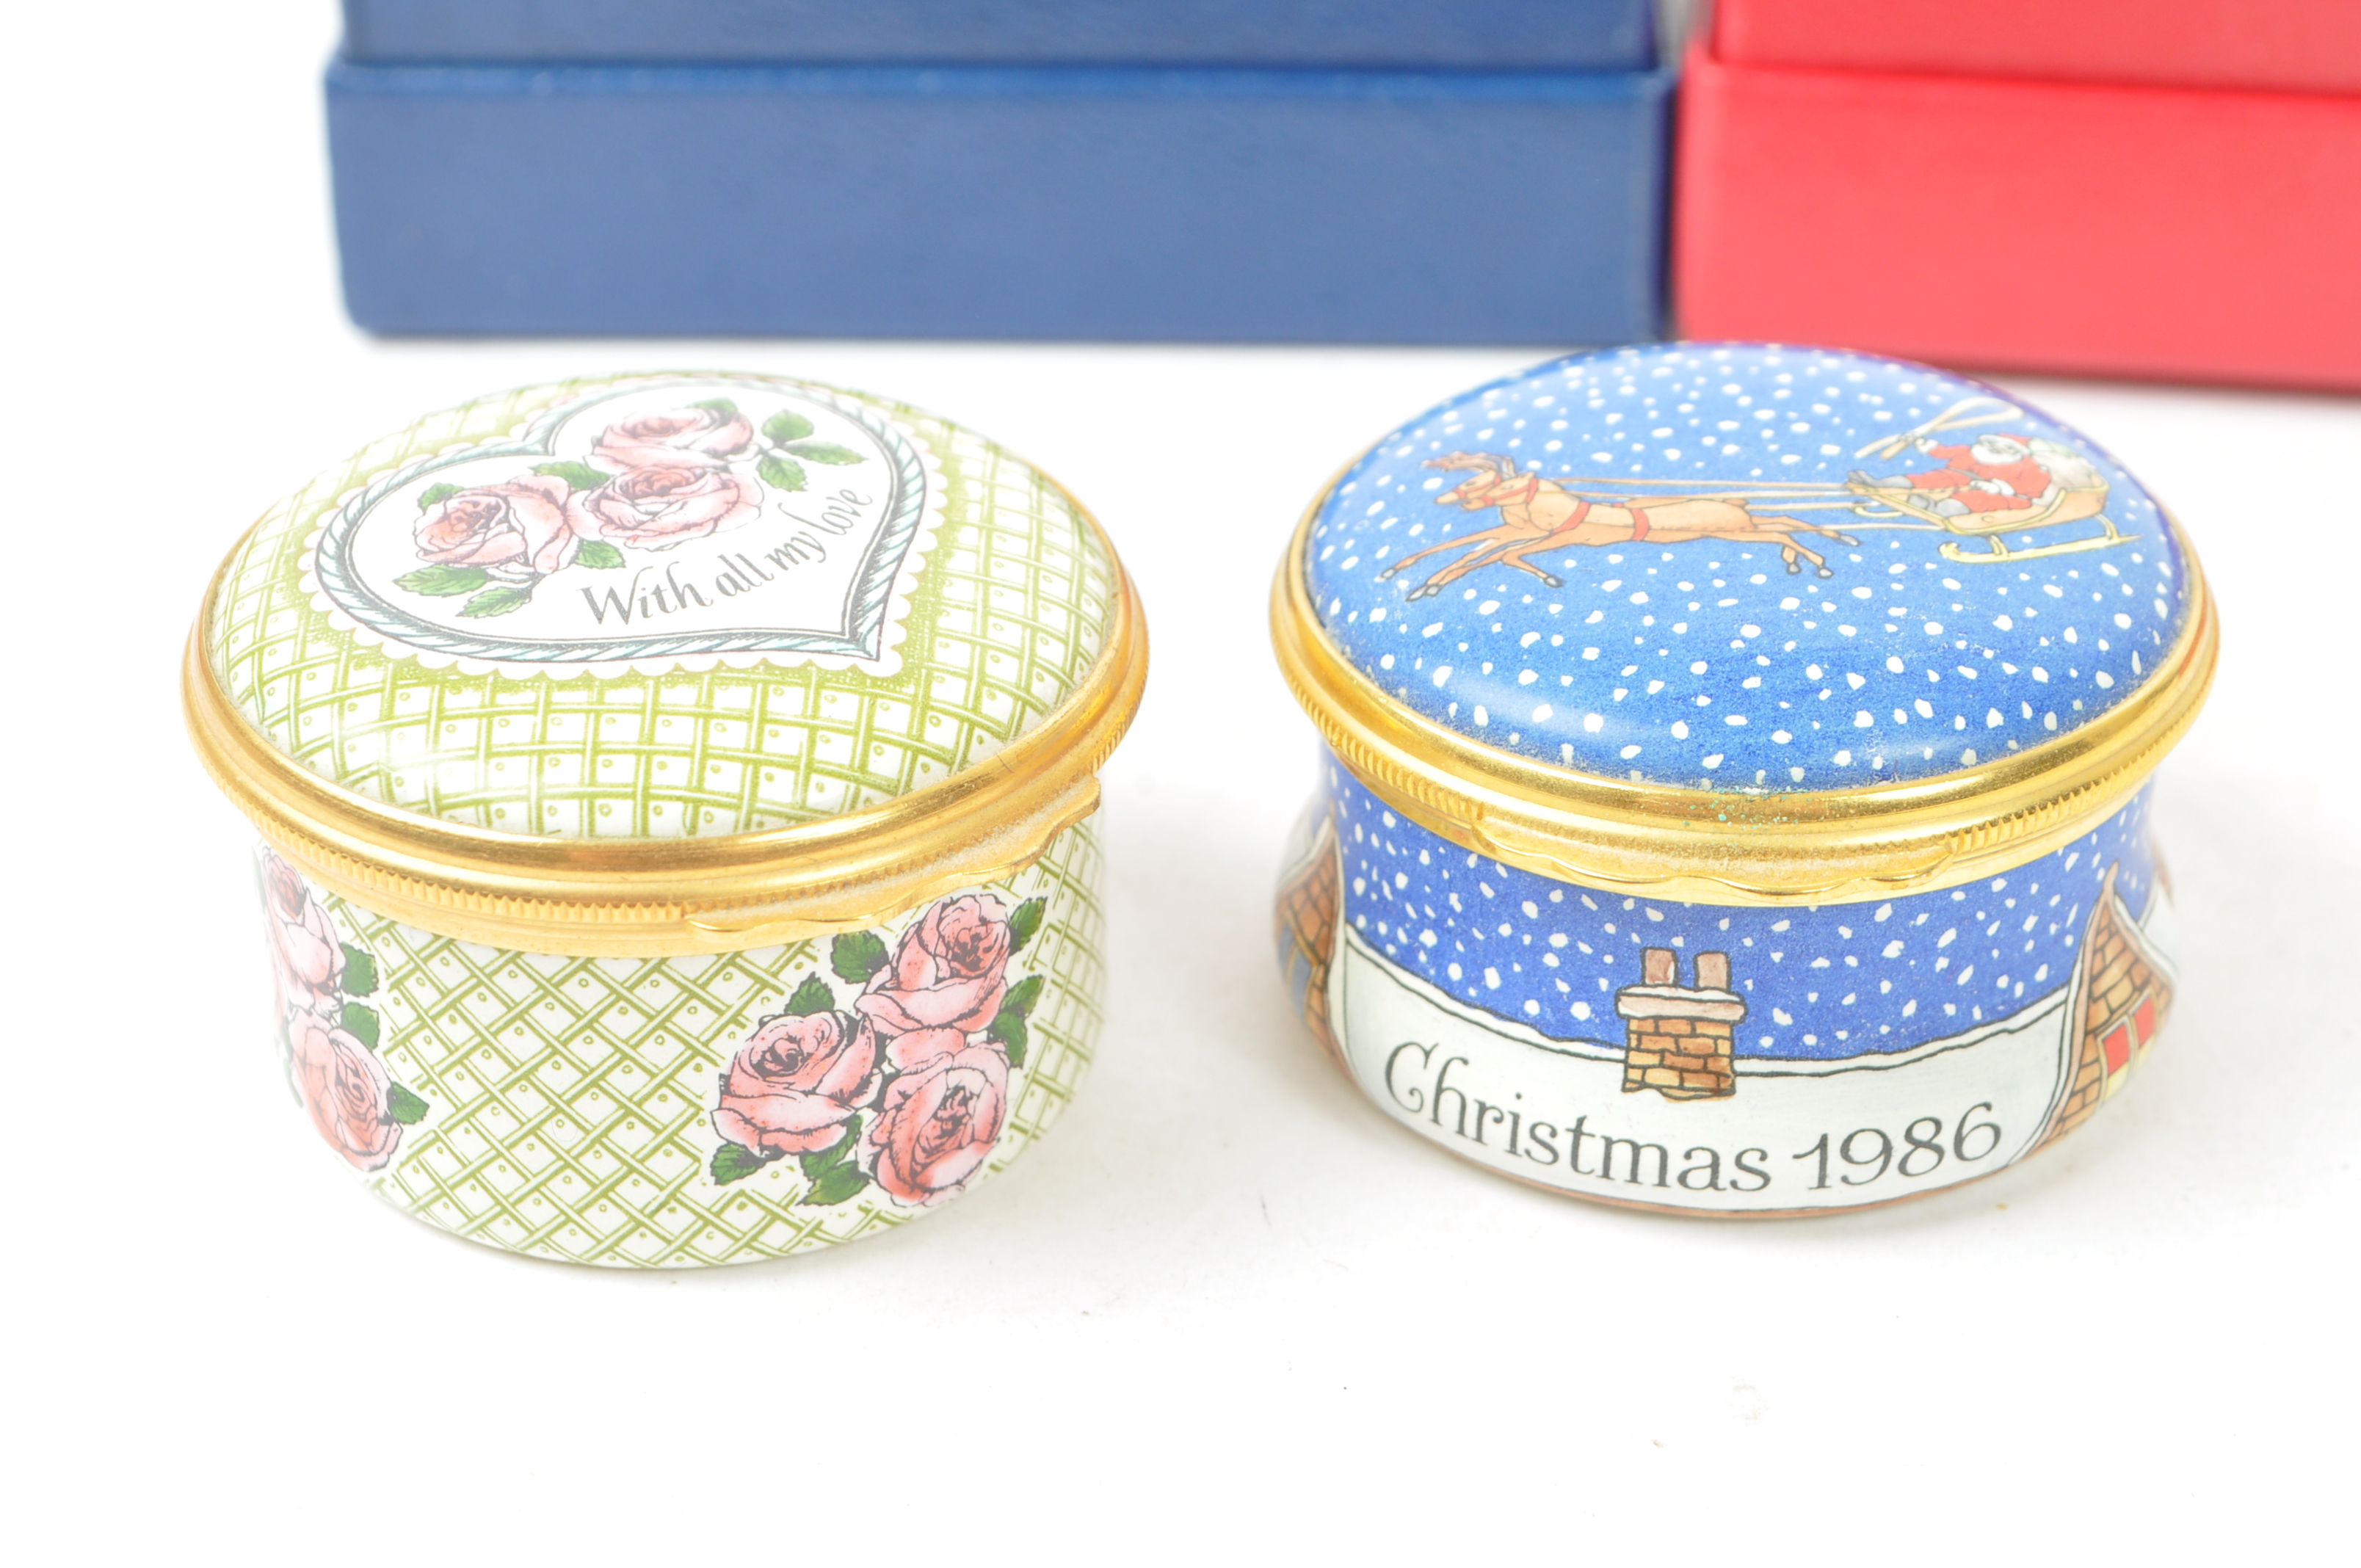 HALCYON DAYS ENAMELS - COLLECTION OF 1980S ENAMEL BOXES - Image 5 of 6